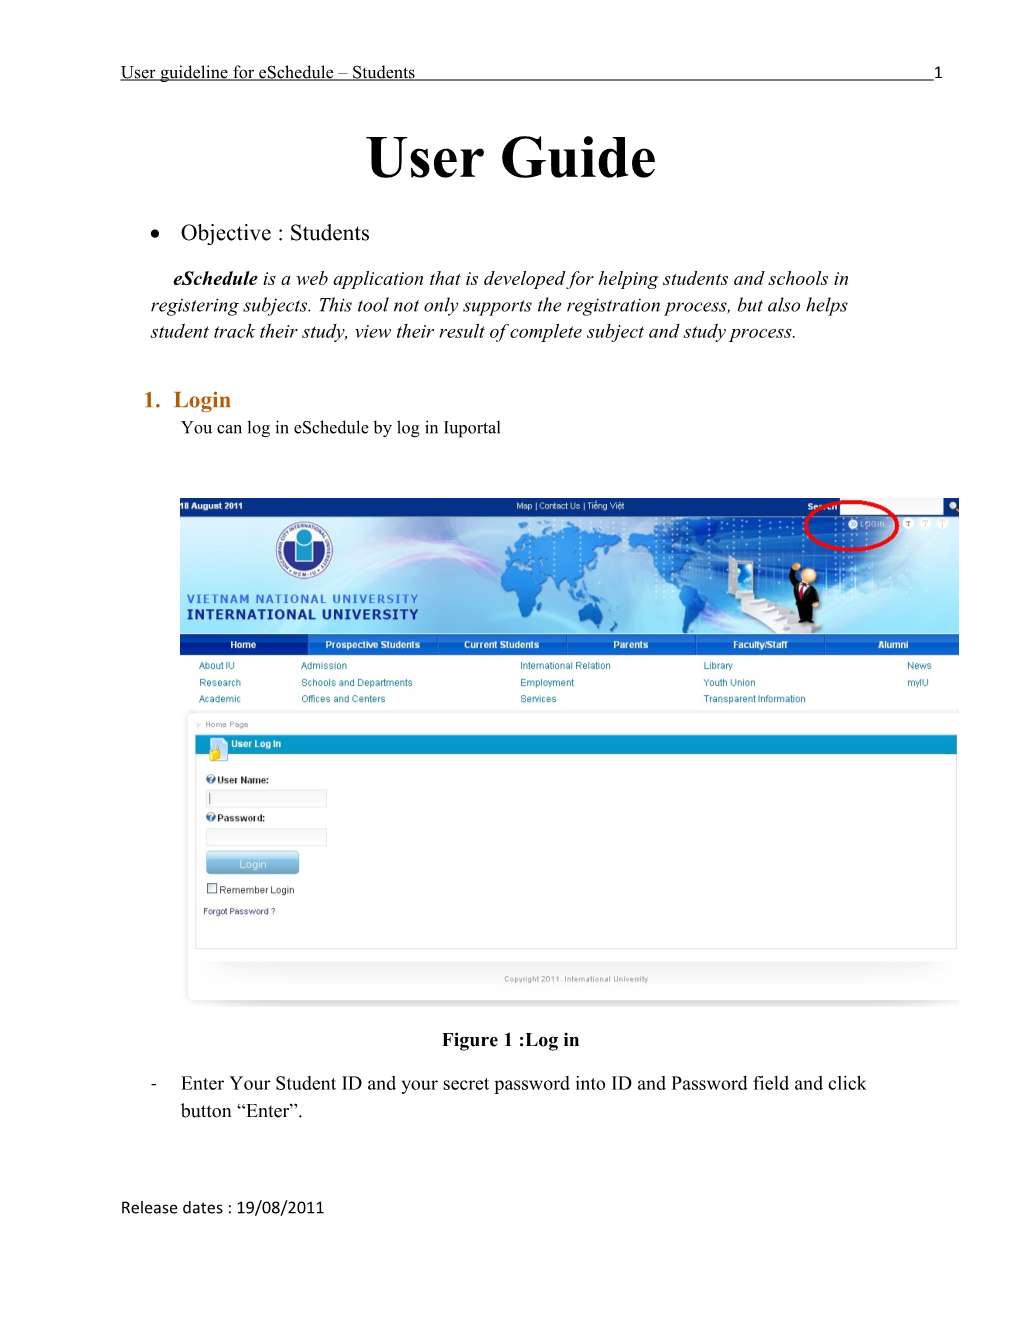 User Guideline for Eschedule Students 11